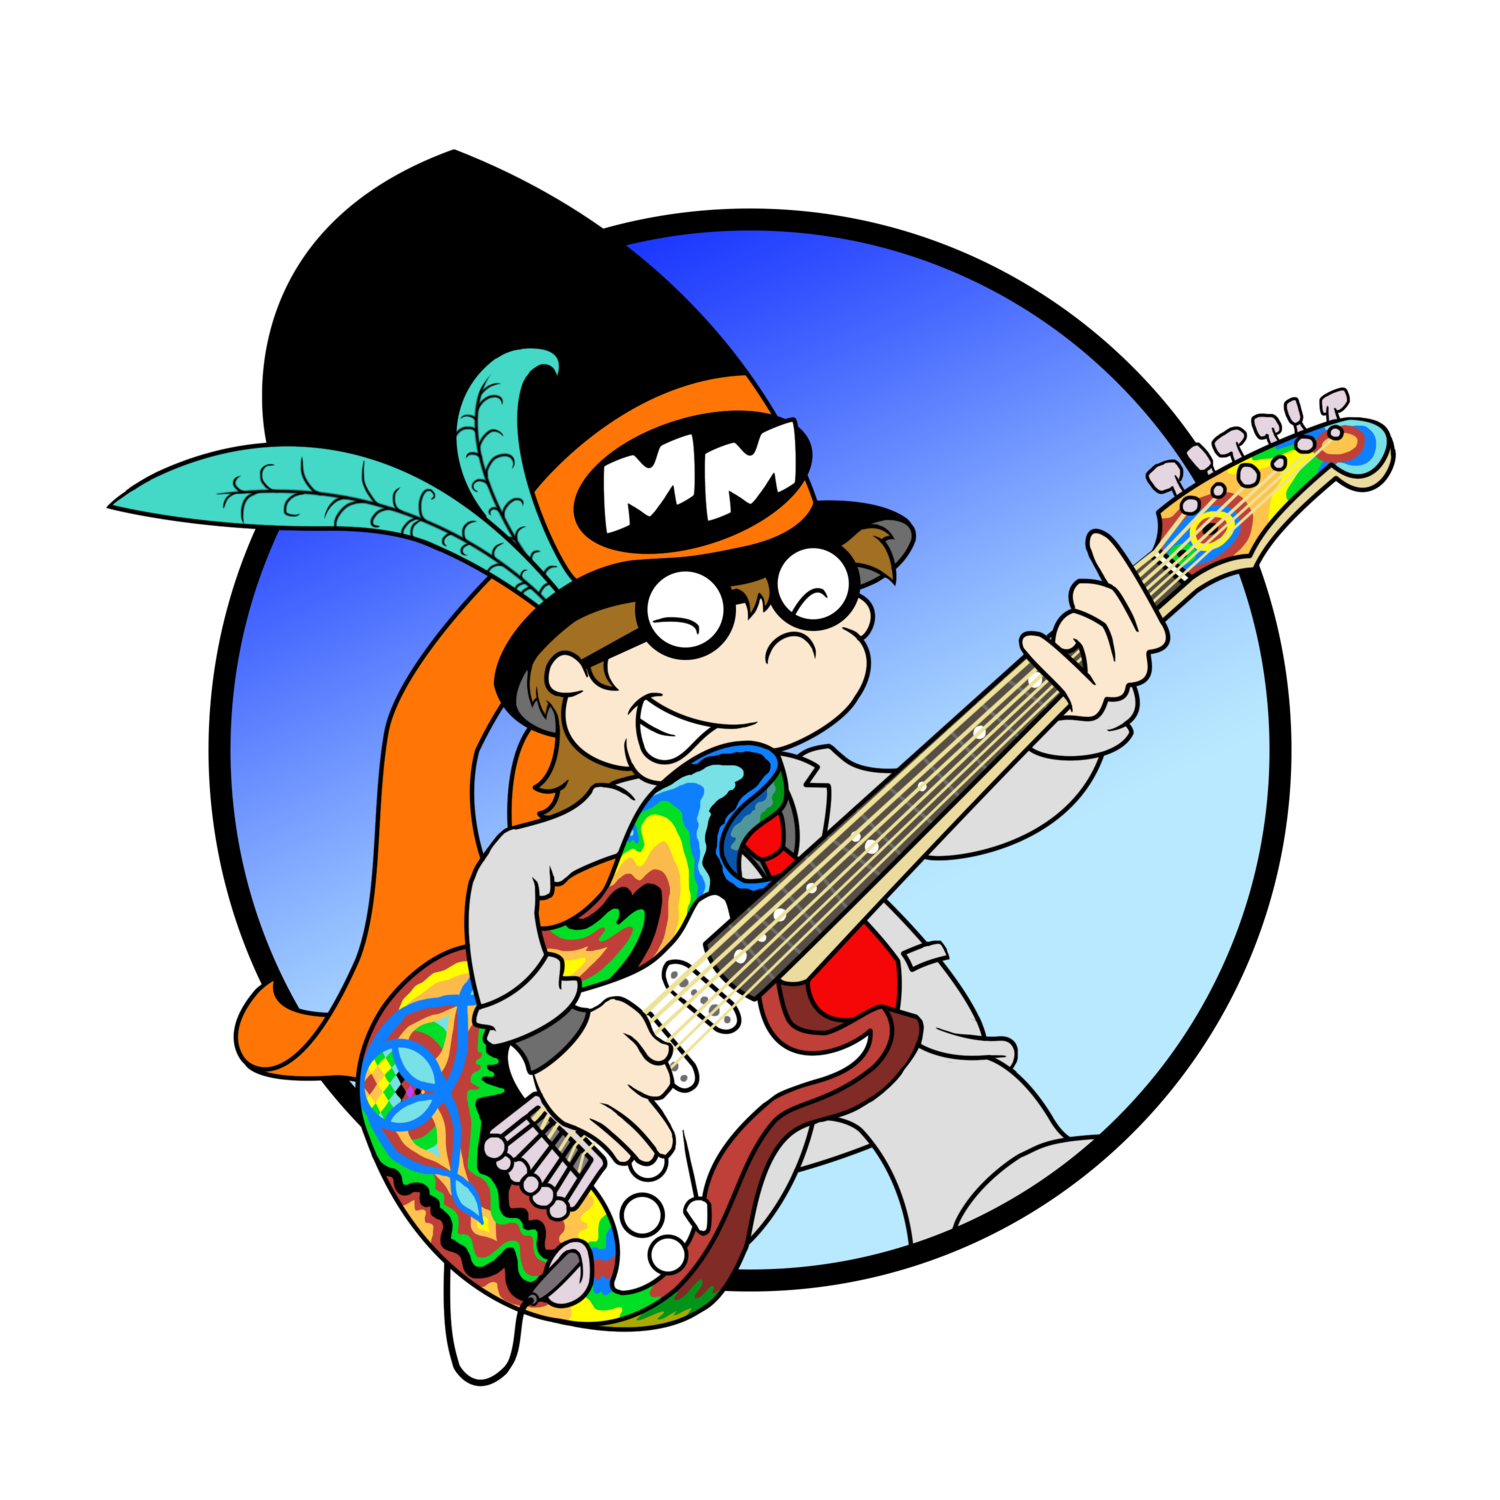 Musical clipart music festival. Upcoming shows marky monday